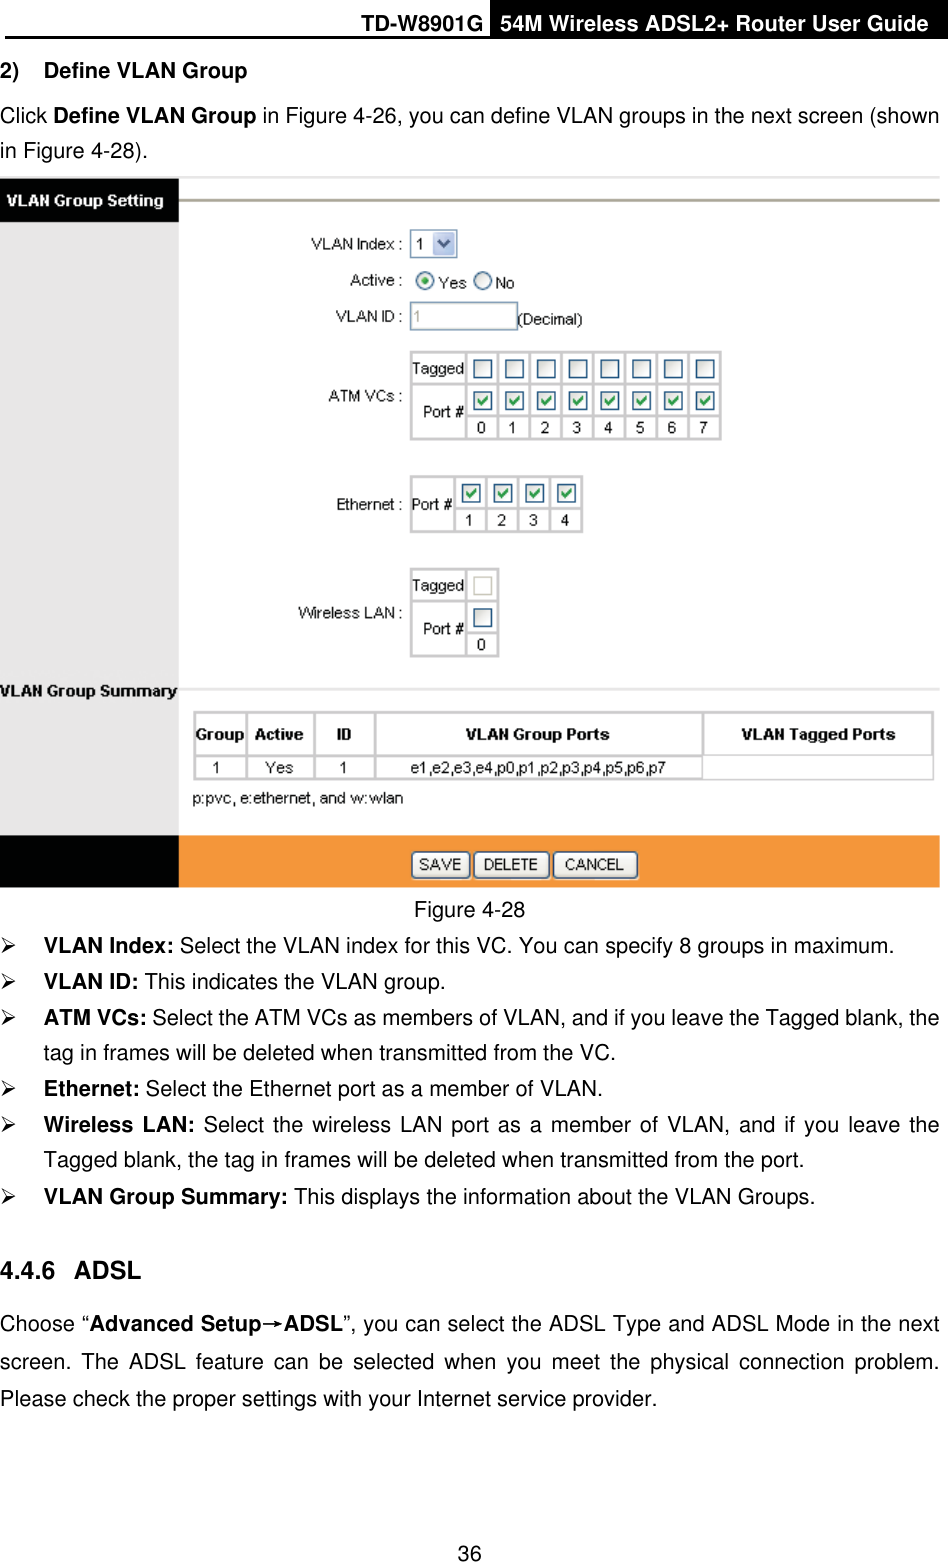 TD-W8901G 54M Wireless ADSL2+ Router User Guide362)  Define VLAN Group   Click Define VLAN Group in Figure 4-26, you can define VLAN groups in the next screen (shown in Figure 4-28). Figure 4-28 ¾VLAN Index: Select the VLAN index for this VC. You can specify 8 groups in maximum. ¾VLAN ID: This indicates the VLAN group. ¾ATM VCs: Select the ATM VCs as members of VLAN, and if you leave the Tagged blank, the tag in frames will be deleted when transmitted from the VC. ¾Ethernet: Select the Ethernet port as a member of VLAN. ¾Wireless LAN: Select the wireless LAN port as a member of VLAN, and if you leave the Tagged blank, the tag in frames will be deleted when transmitted from the port.¾VLAN Group Summary: This displays the information about the VLAN Groups. 4.4.6 ADSLChoose “Advanced SetupėADSL”, you can select the ADSL Type and ADSL Mode in the next screen. The ADSL feature can be selected when you meet the physical connection problem. Please check the proper settings with your Internet service provider. 